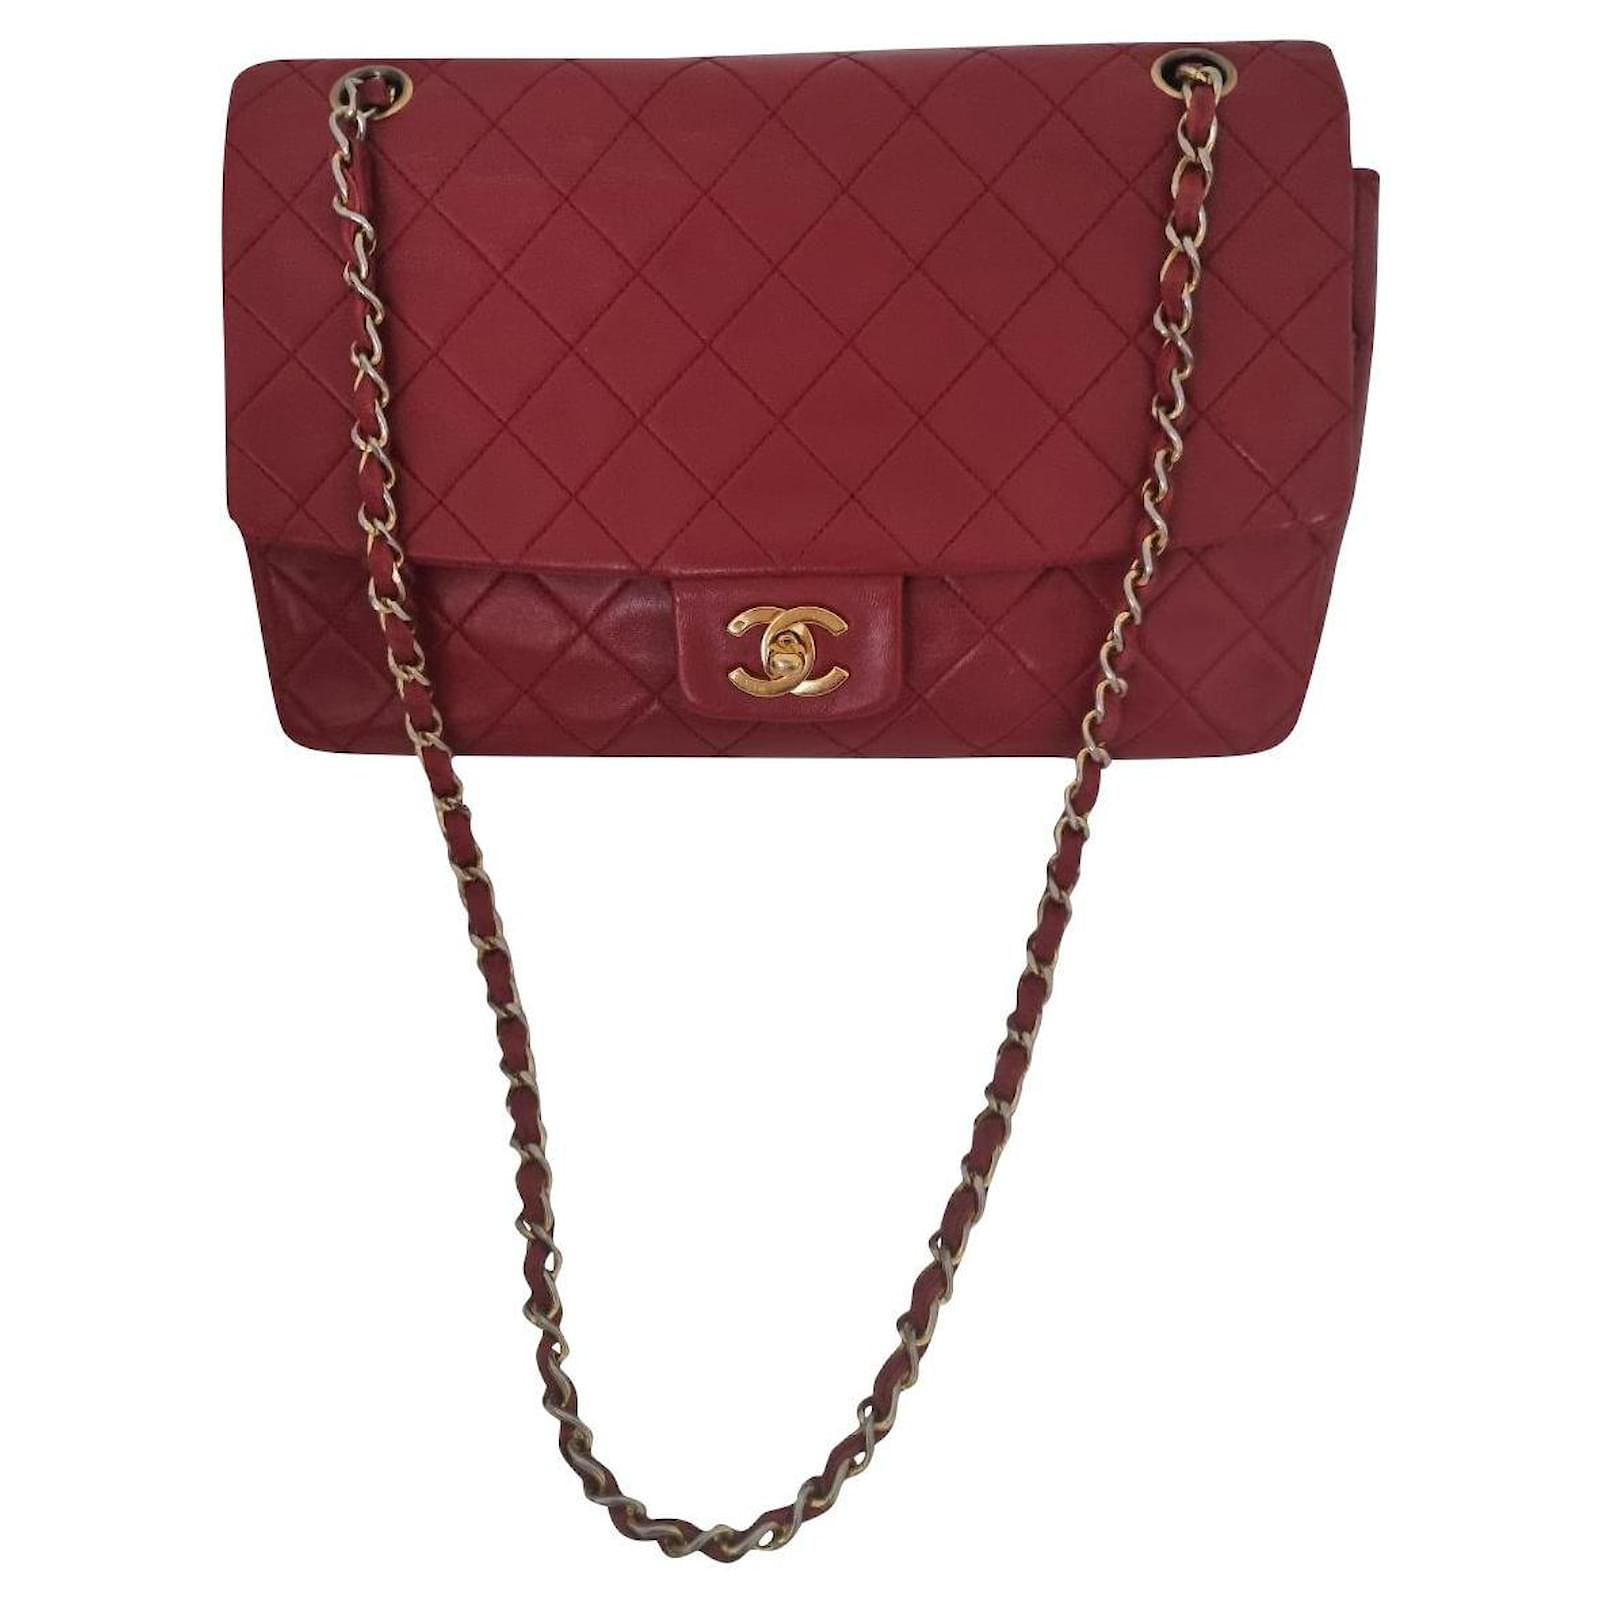 Chanel Red Quilted Lambskin Flap Bag